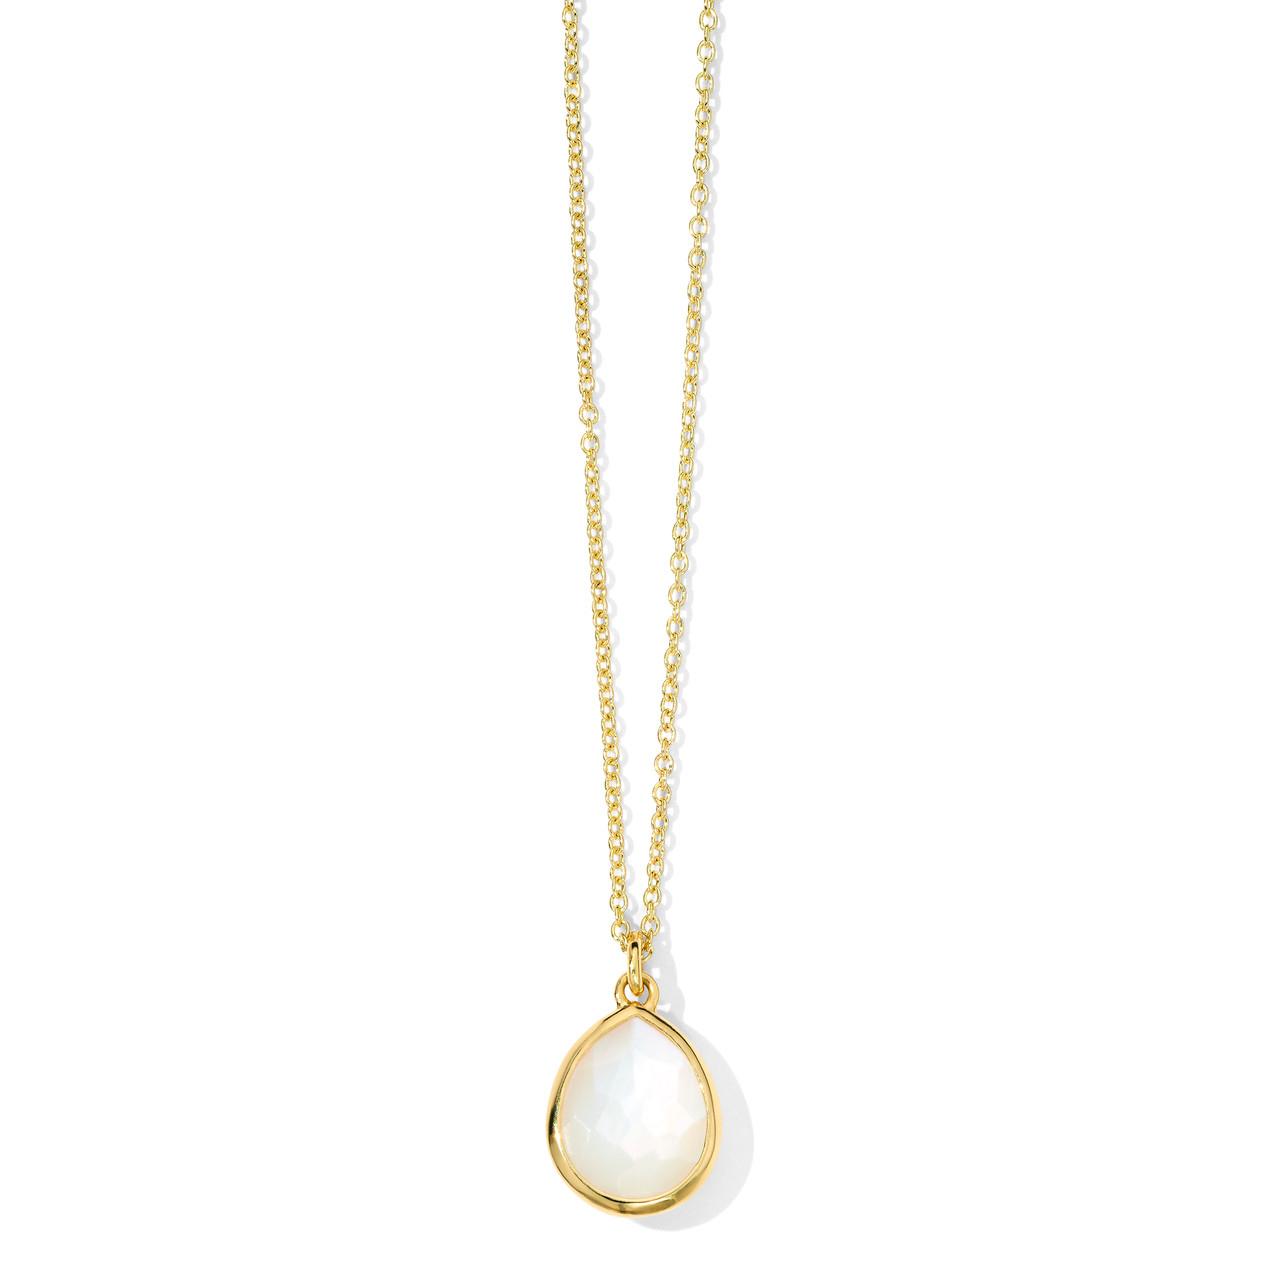 Ippolita Rock Candy Mini Teardrop Mother of Pearl Pendant Necklace in 18k Gold 0